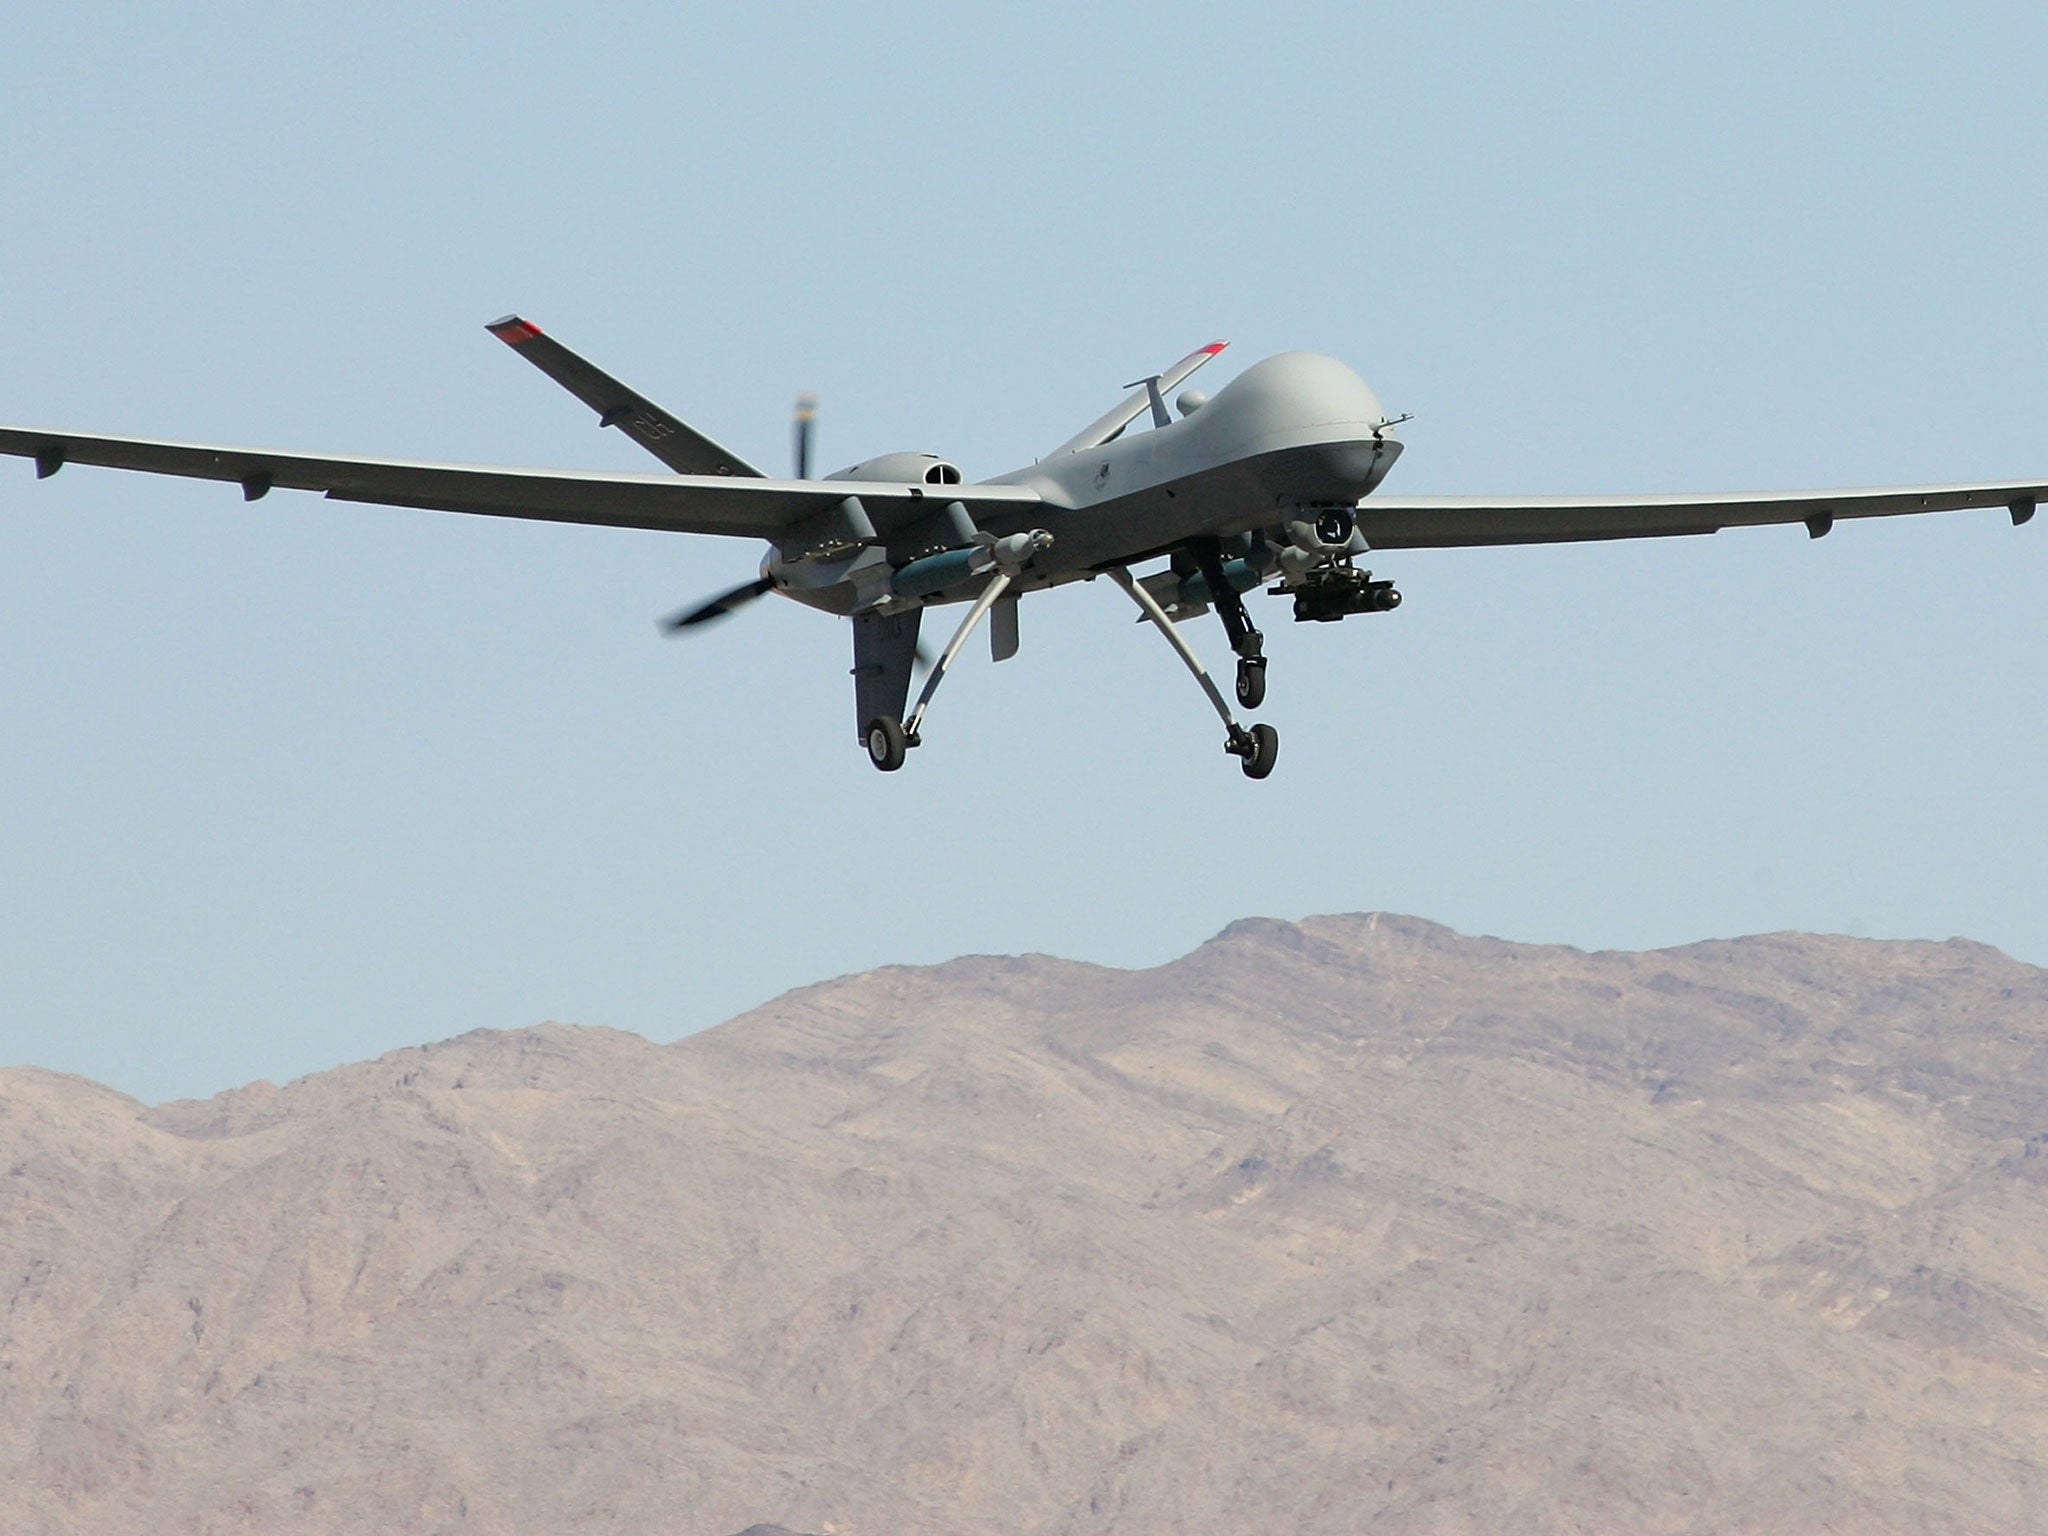 Reaper drones and other aircraft were called in to support US fighters